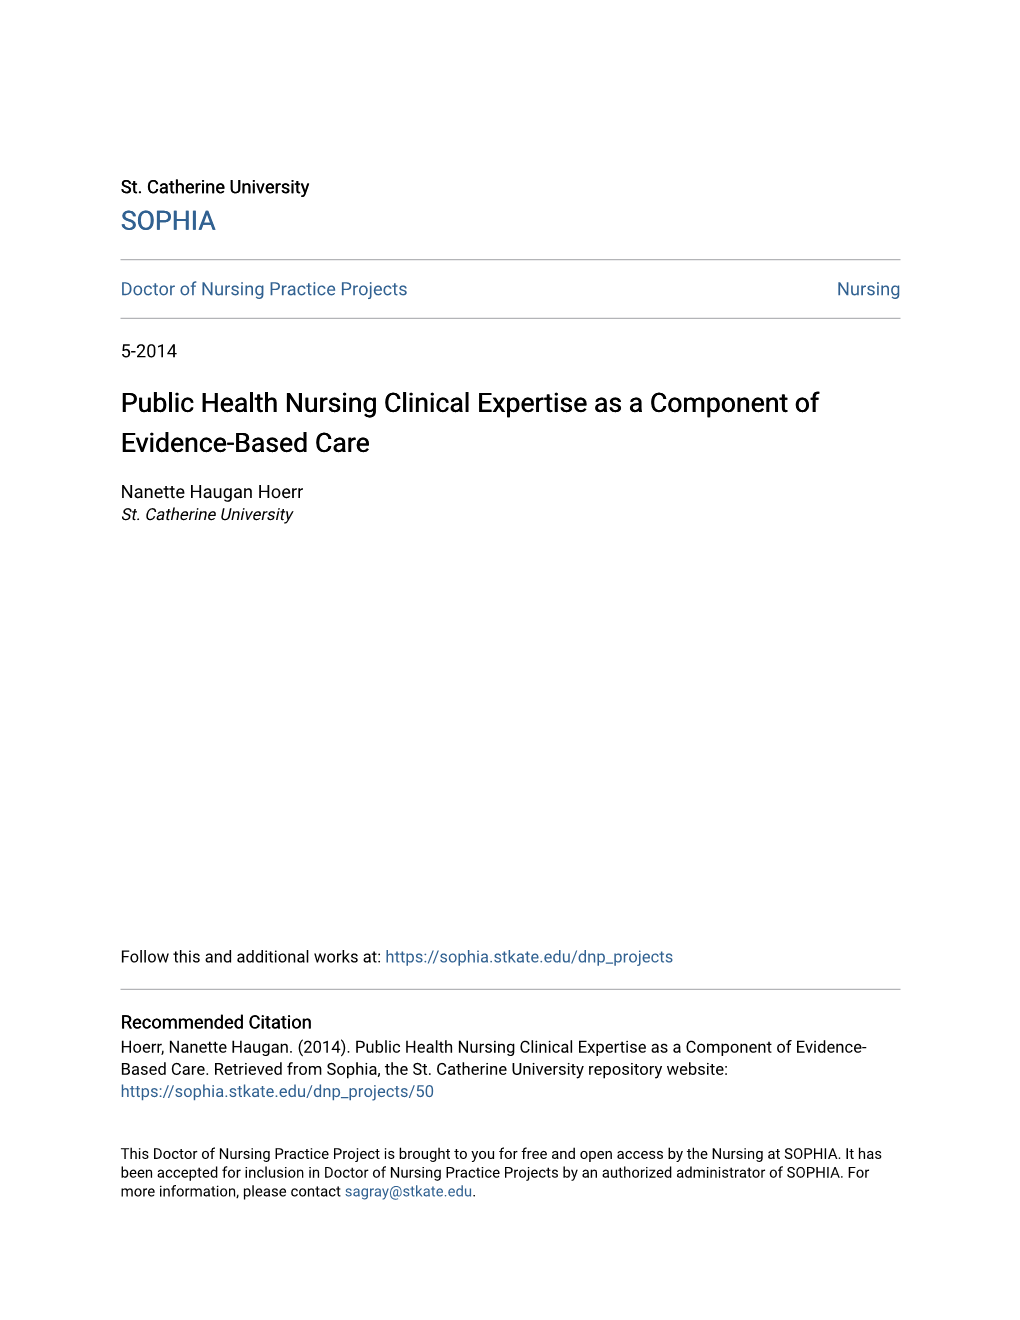 Public Health Nursing Clinical Expertise As a Component of Evidence-Based Care